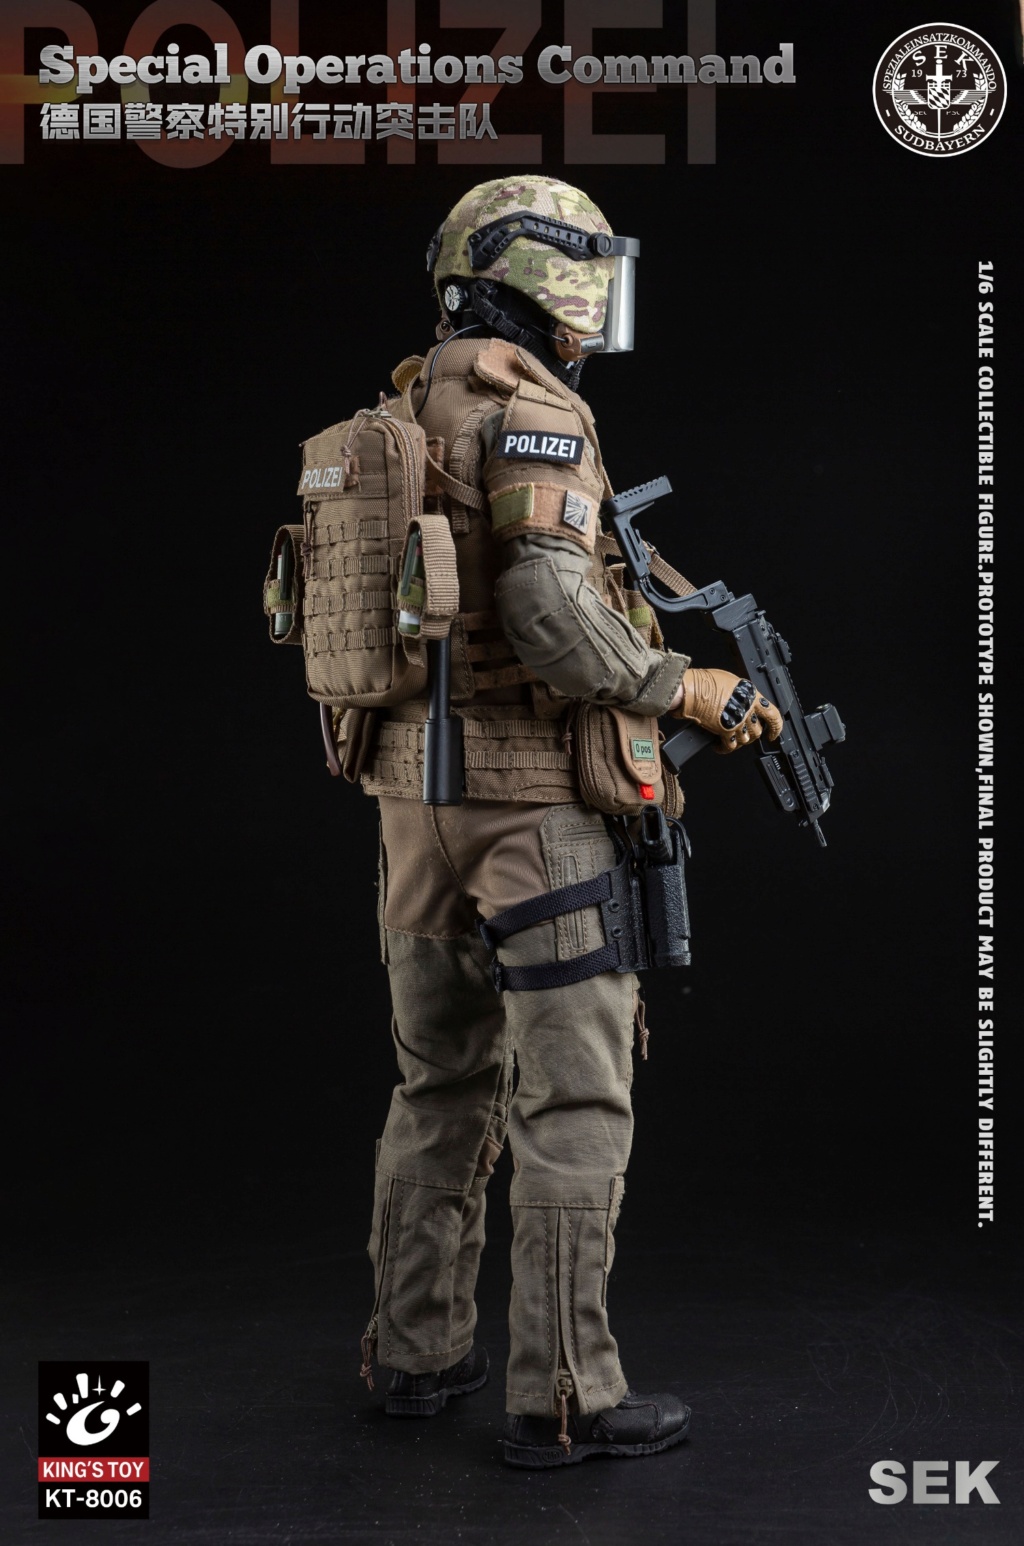 NEW PRODUCT: King's Toy #KT-8006 1/6 Scale Special Operations Command SEK 09241111